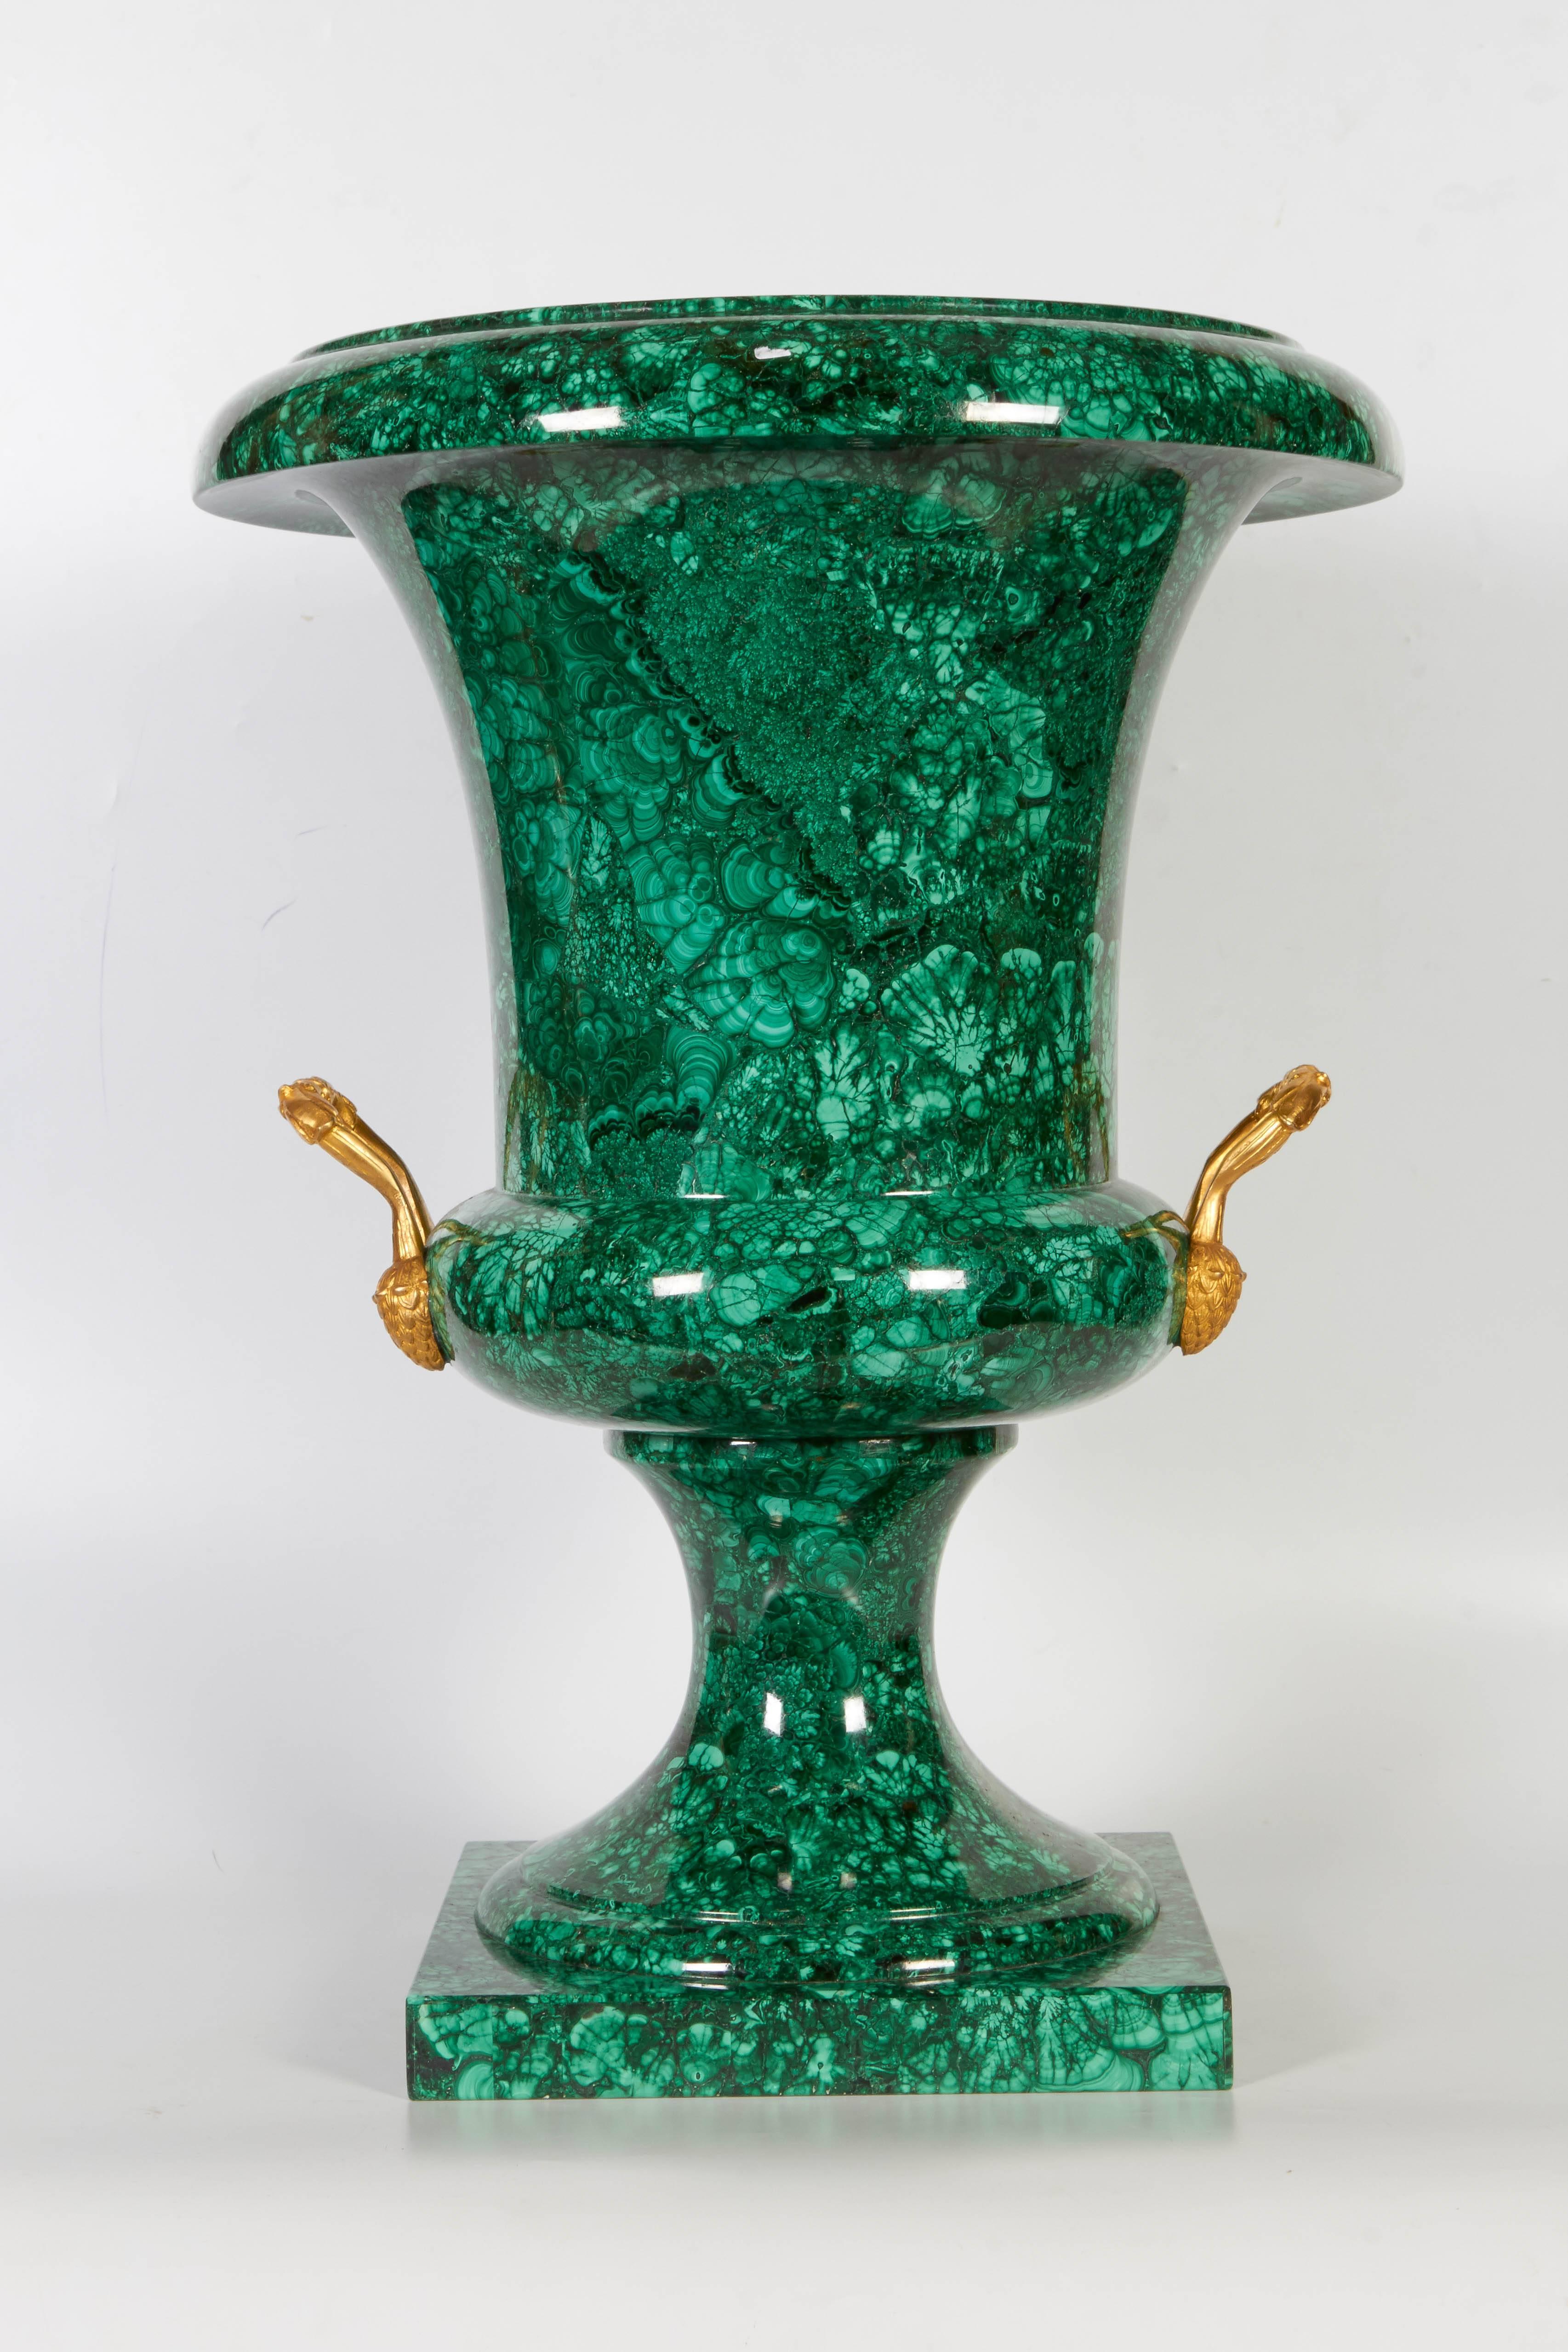 Large Russian Neoclassical Malachite and Ormolu Urn or Vase, 19th Century In Excellent Condition For Sale In New York, NY